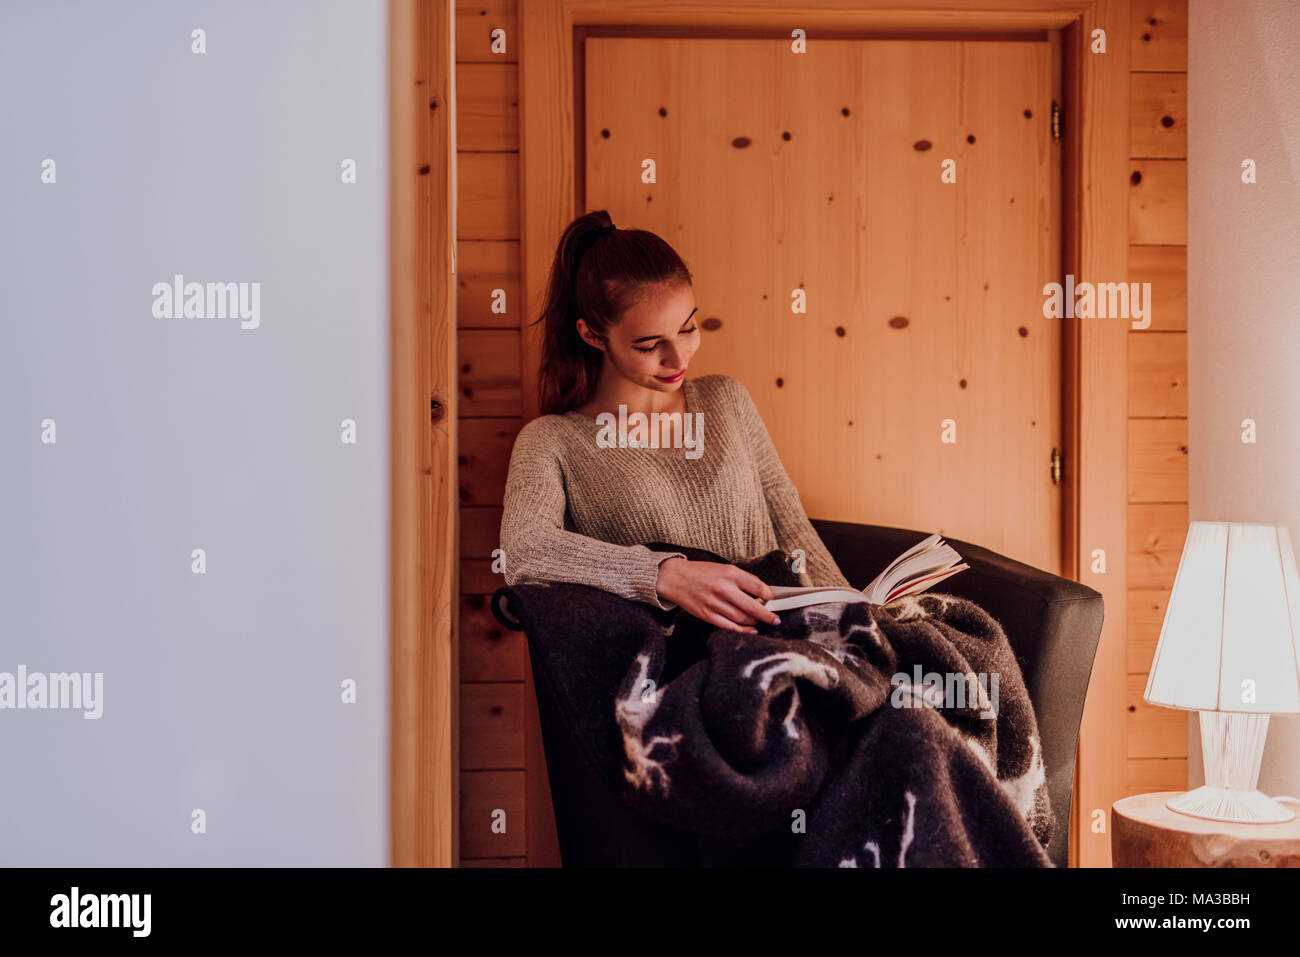 young woman wrapped in a blanket,reading a book,lamp,warm light Stock Photo